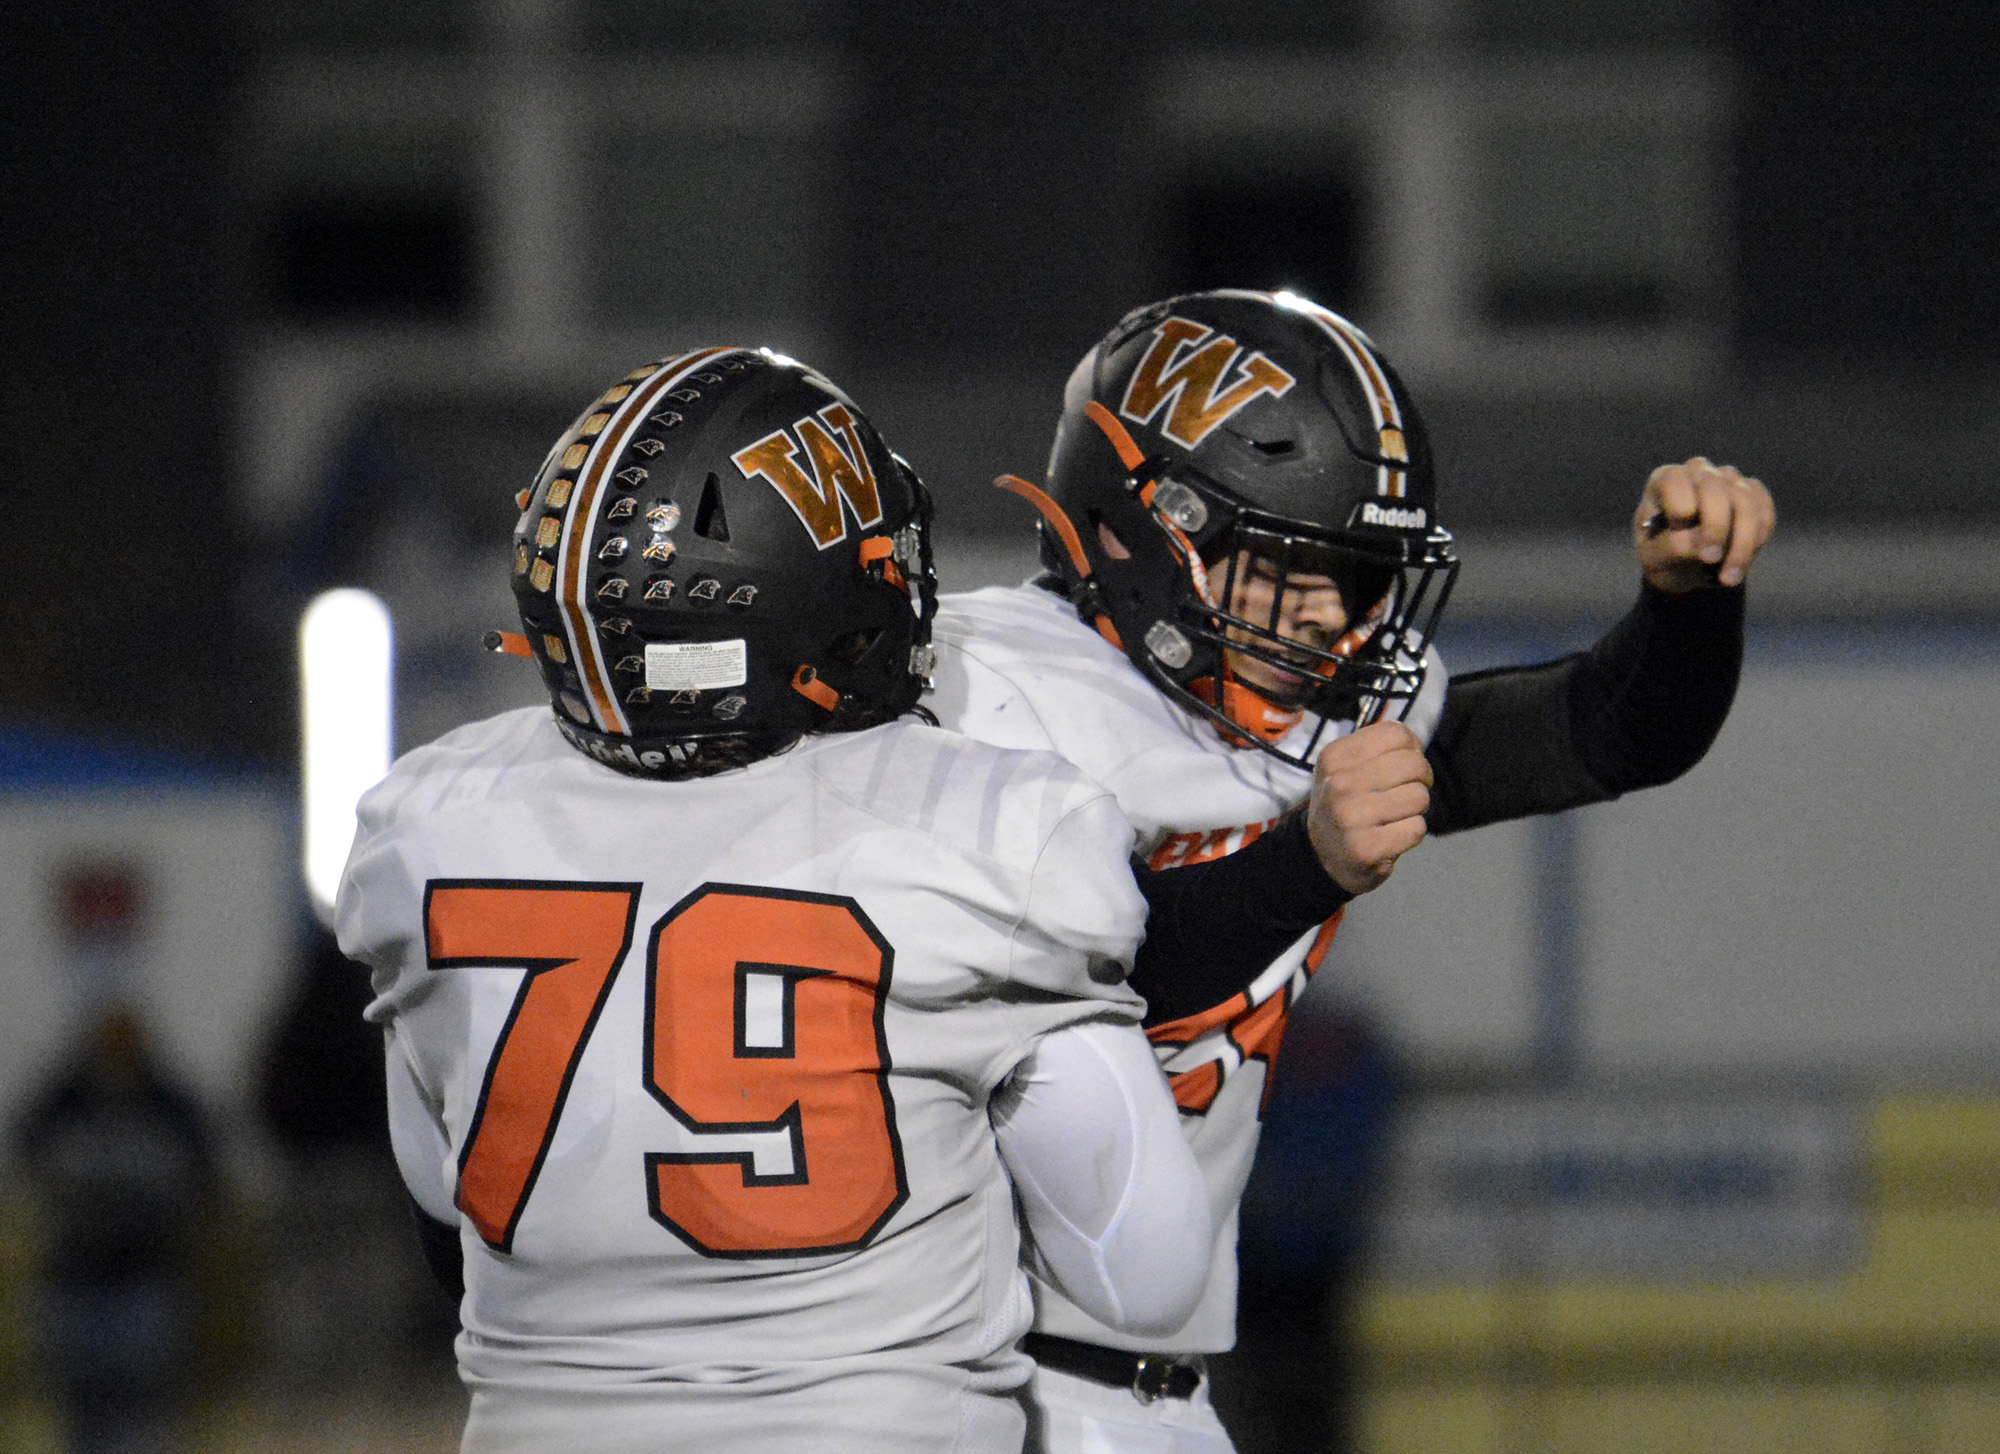 Washougal's William Cooper celebrates with teammate Jose Alvarez-Cruze (79) after Cooper returned an interception for a touchdown in a 30-27 loss to Highline in Burien on Friday, Nov. 11, 2022.